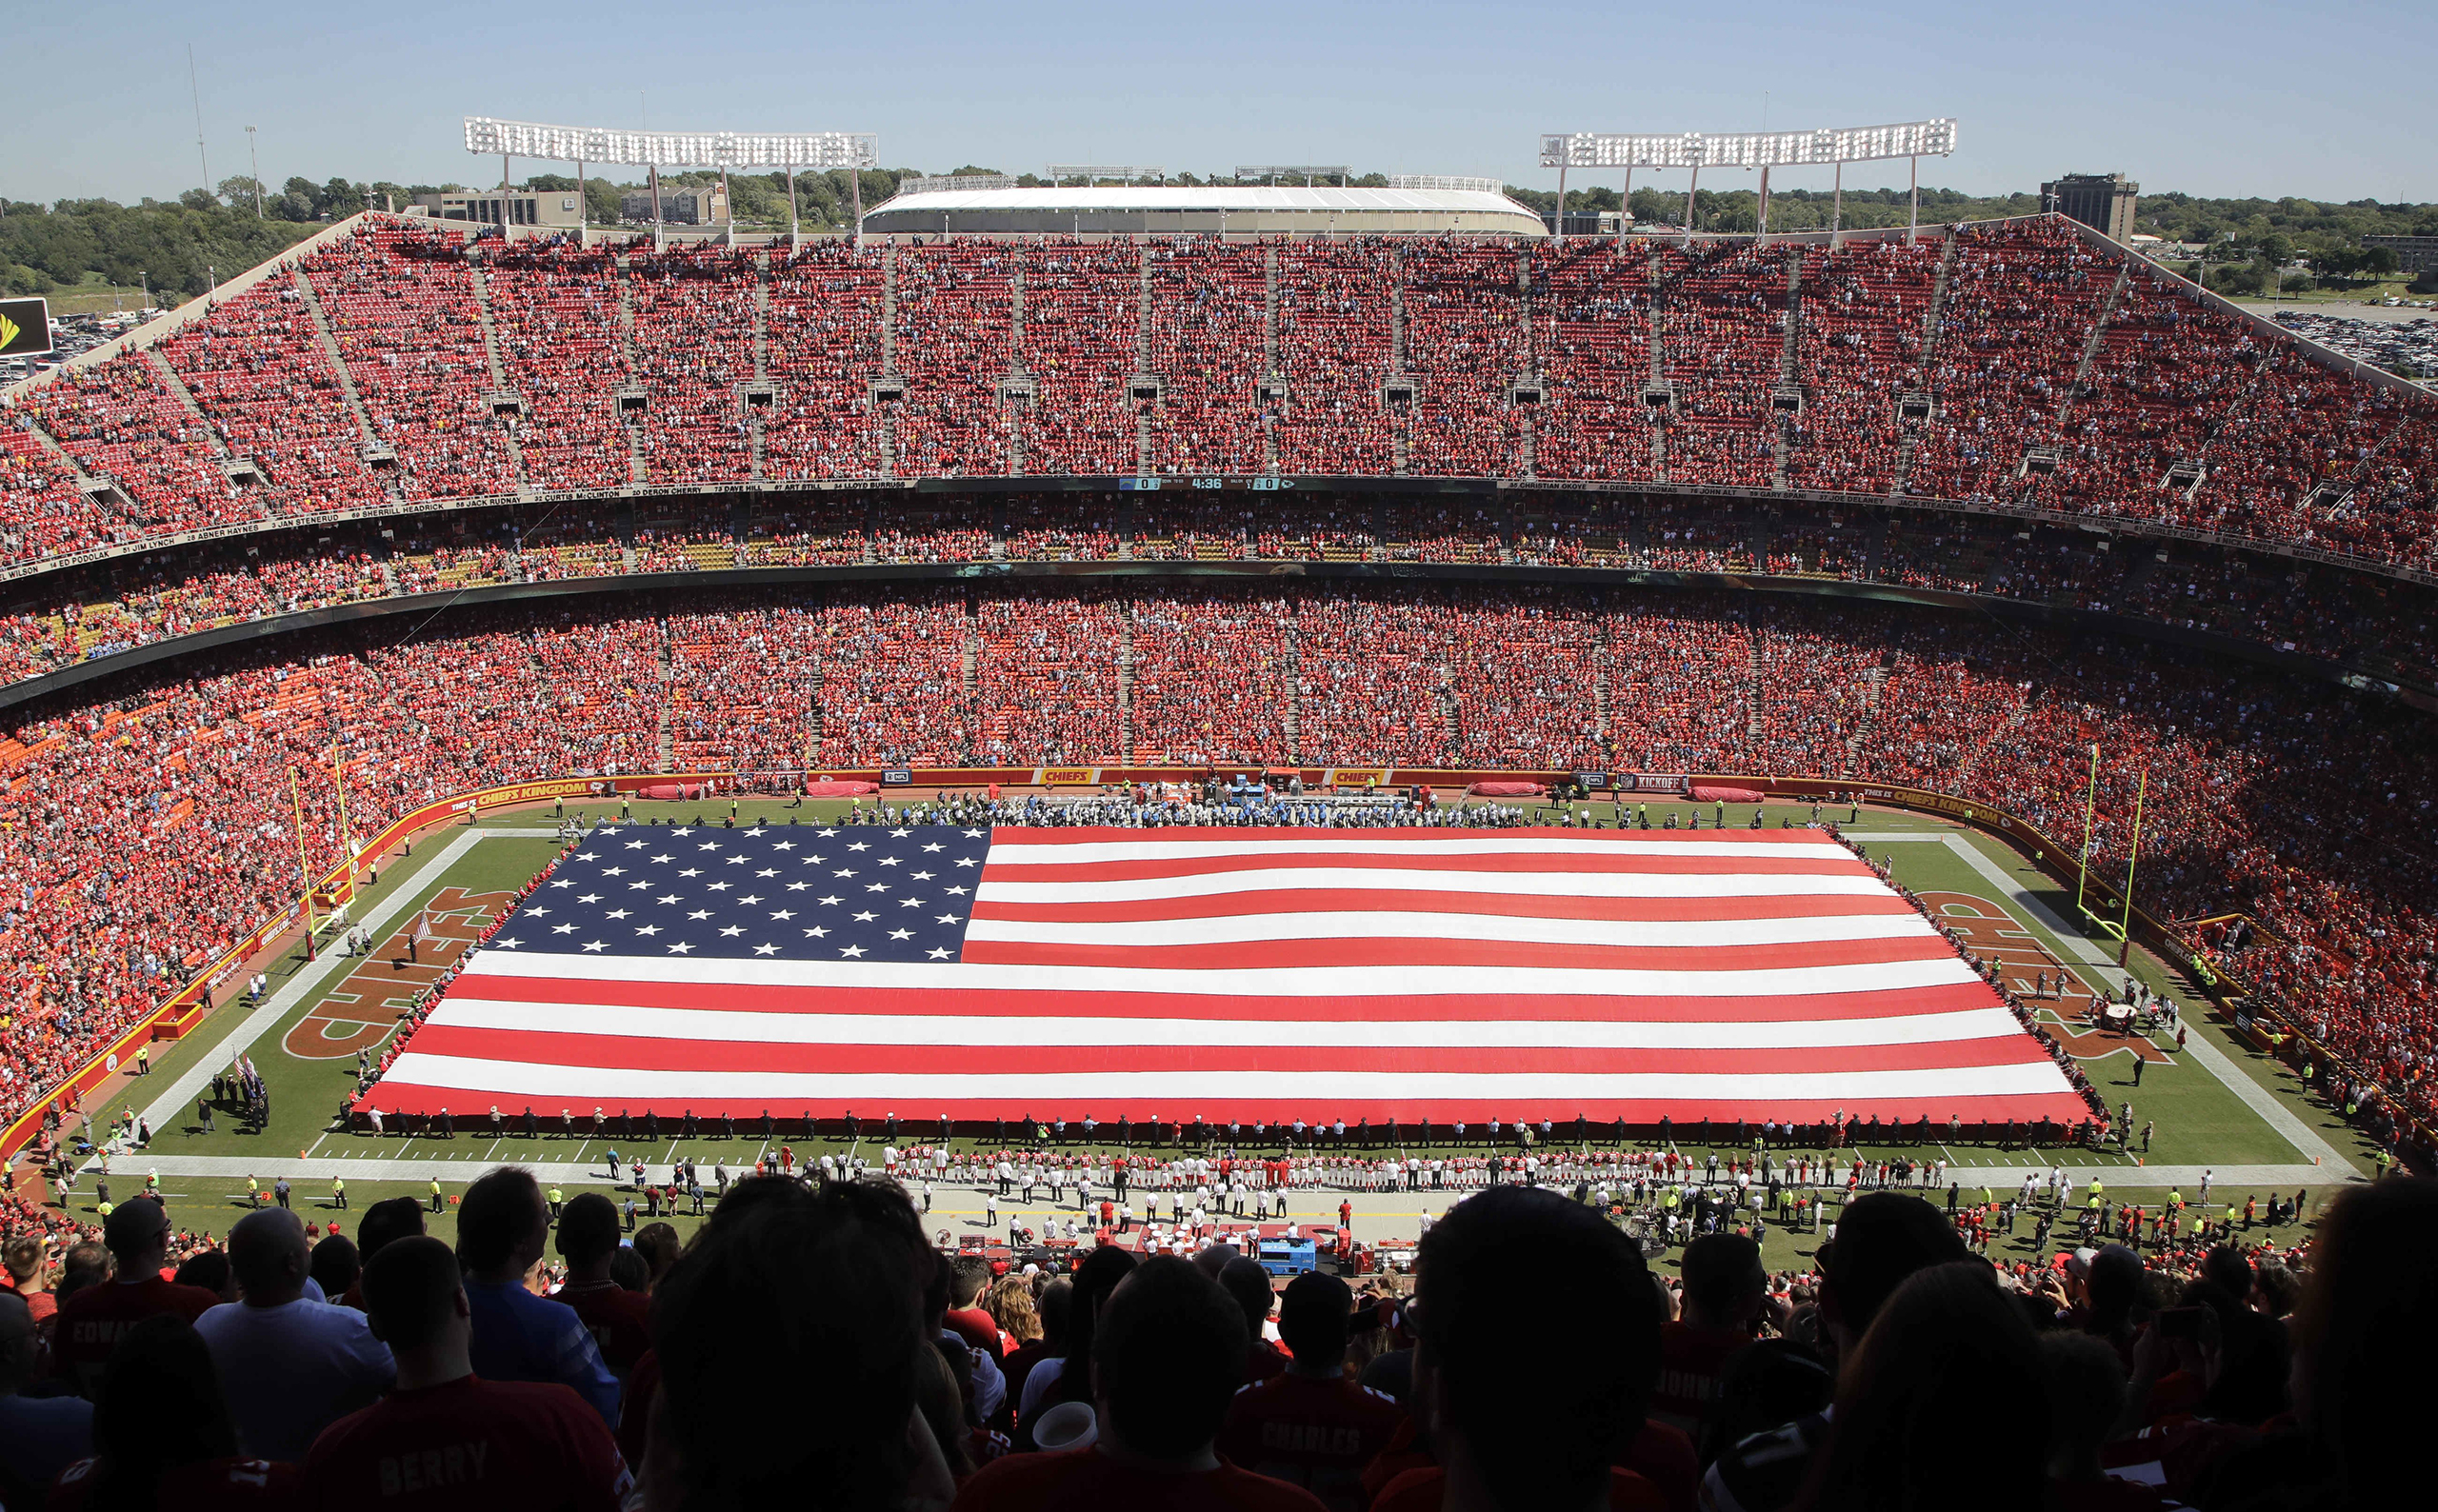 A giant flag is spread over the field at Arrowhead Stadium to commemorate Sept. 11, before an NFL football game between the Kansas City Chiefs and the San Diego Chargers in Kansas City, Missouri, Sept. 11, 2016. (Charlie Riedel—AP)